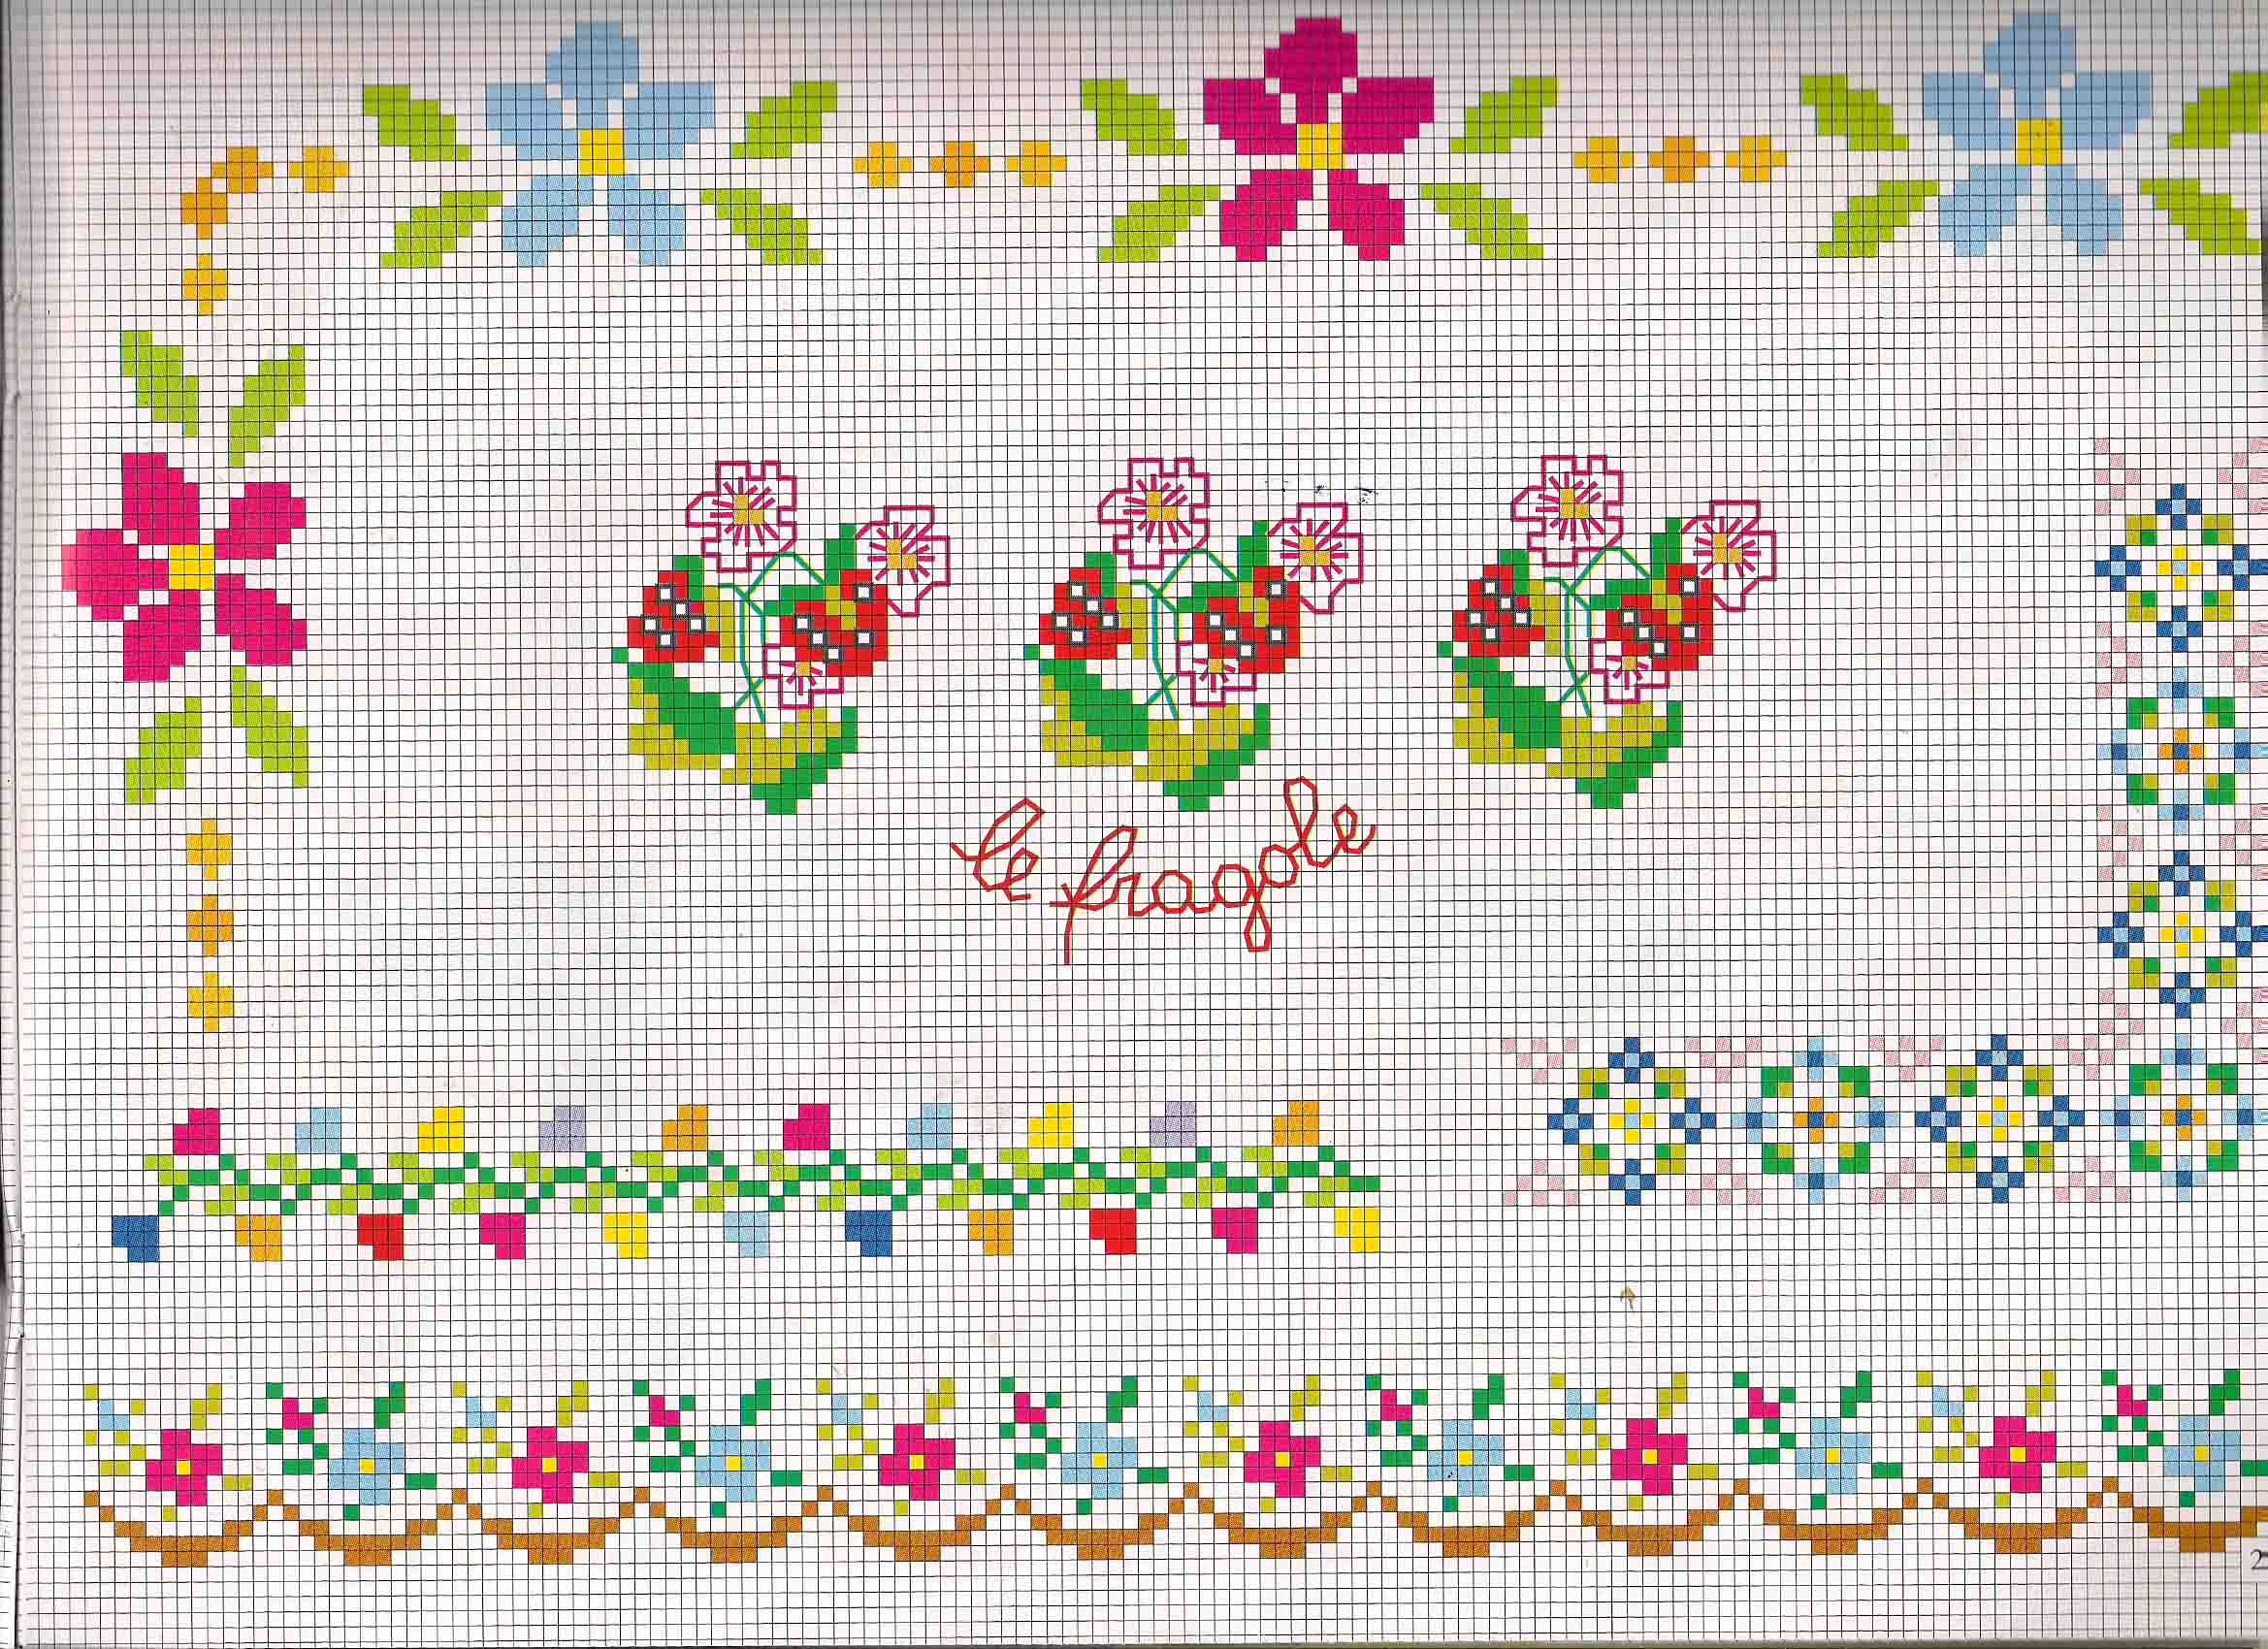 Edges to be embroidered with flowers and flowers cross stitch pattern